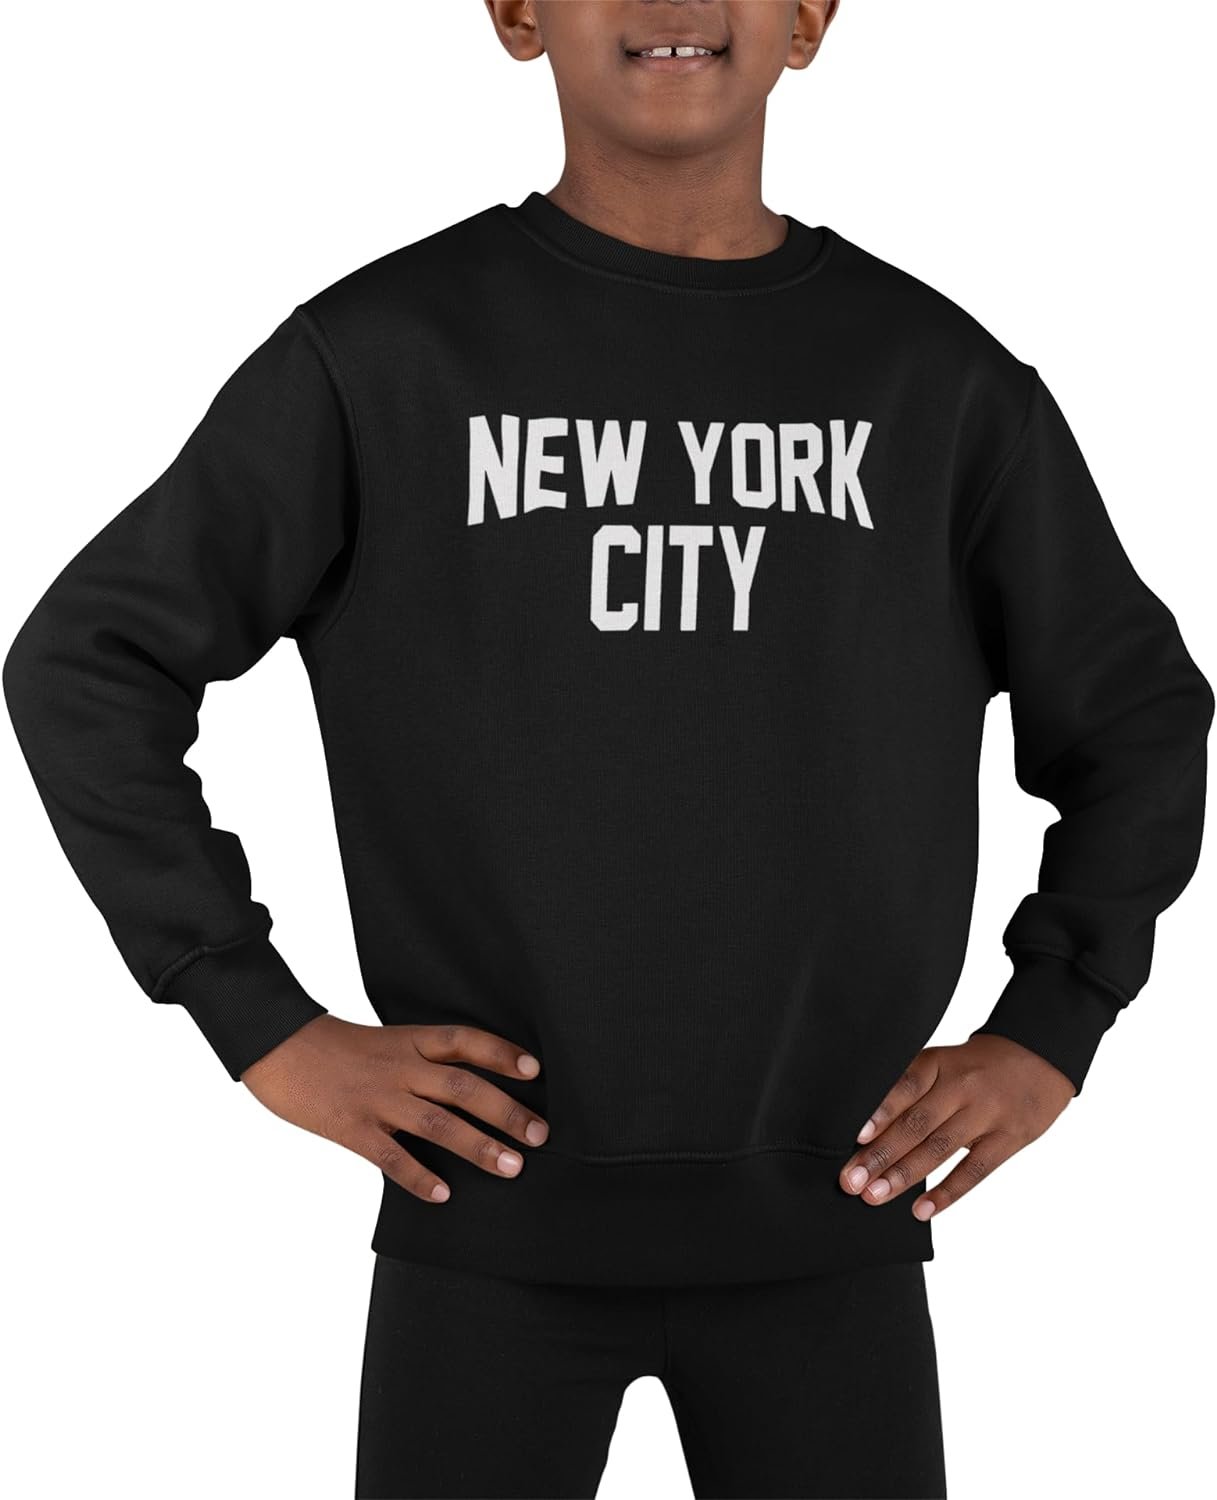 NYC FACTORY New York City Youth Sweatshirt For Kids (Youth, Black)